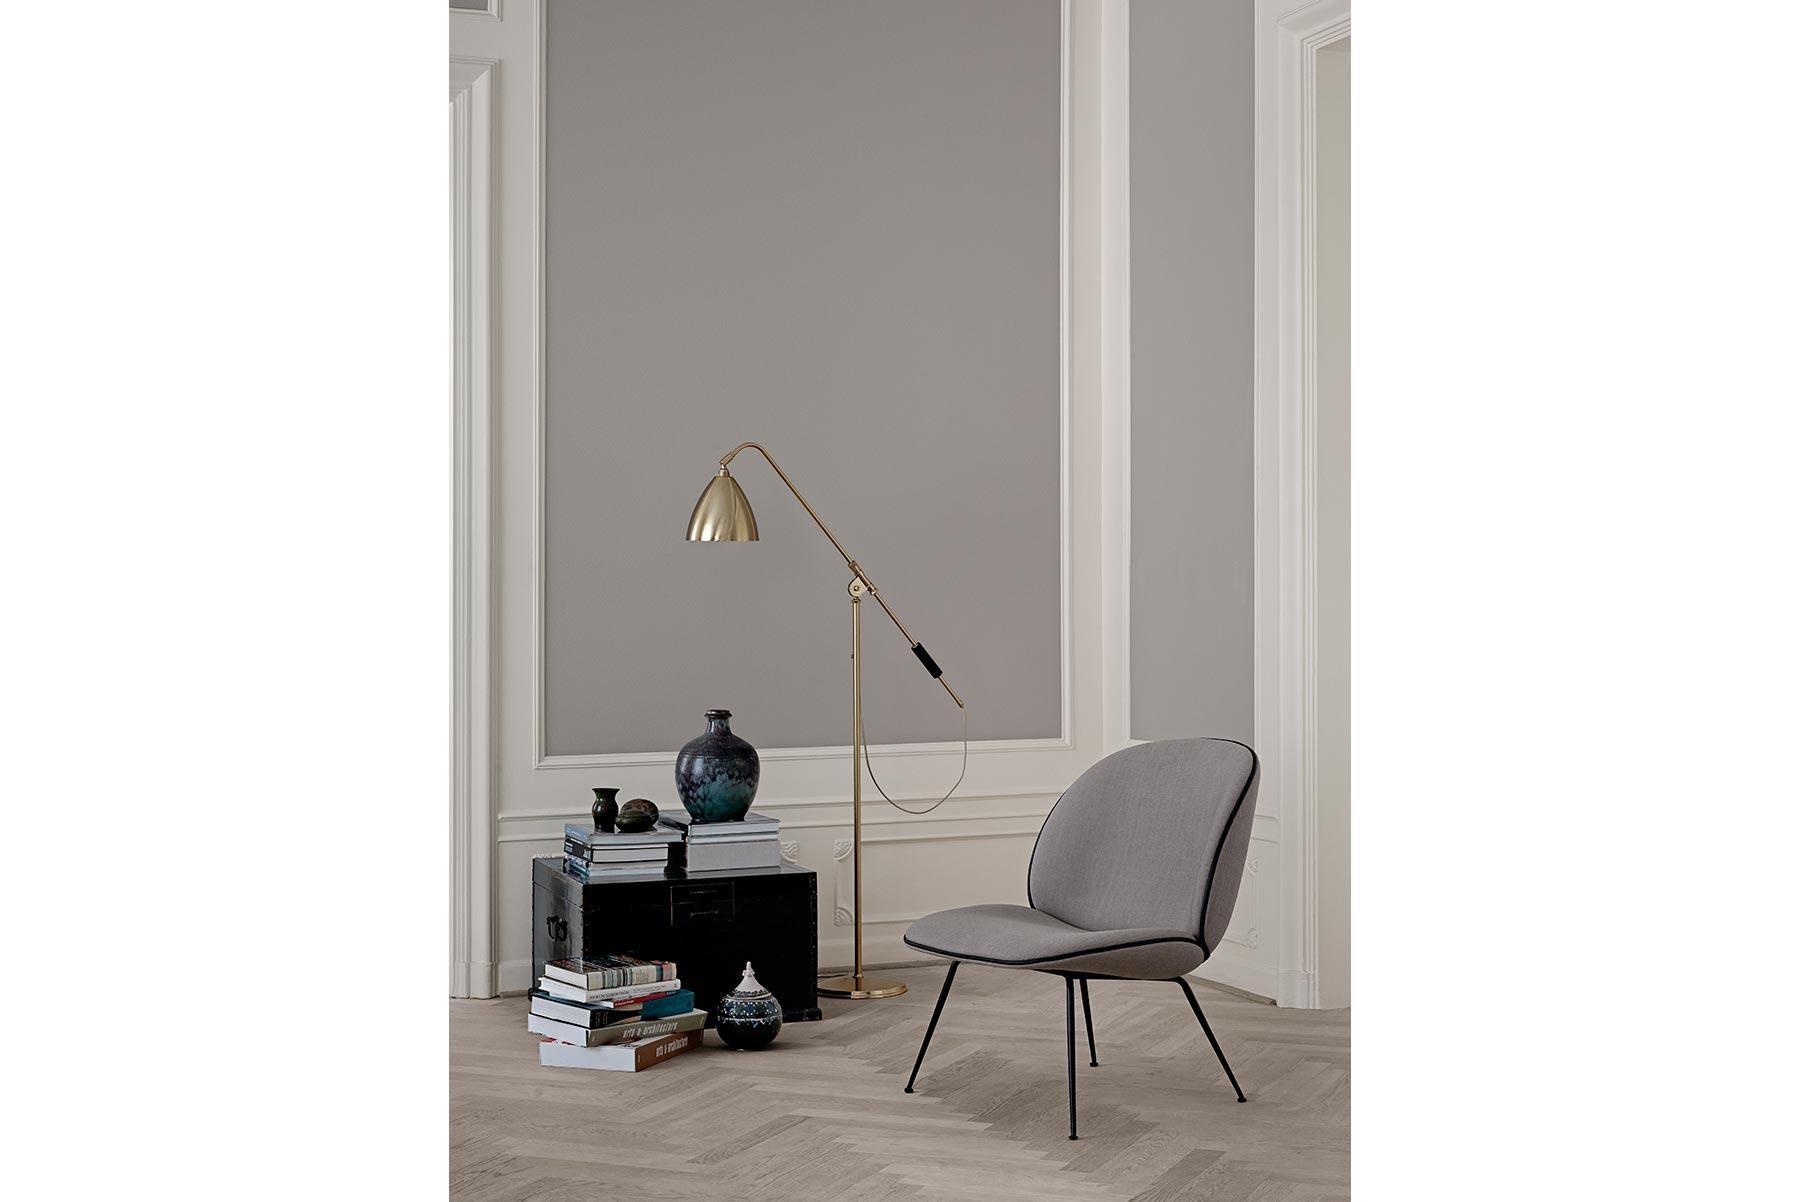 The iconic Bestlite BL4 floor lamp, designed by Robert Dudley Best in 1930, was initially adopted by garages and the Royal Air force engineering departments due to its great functionality and adjustable arm. With its numerous finishes, the timeless